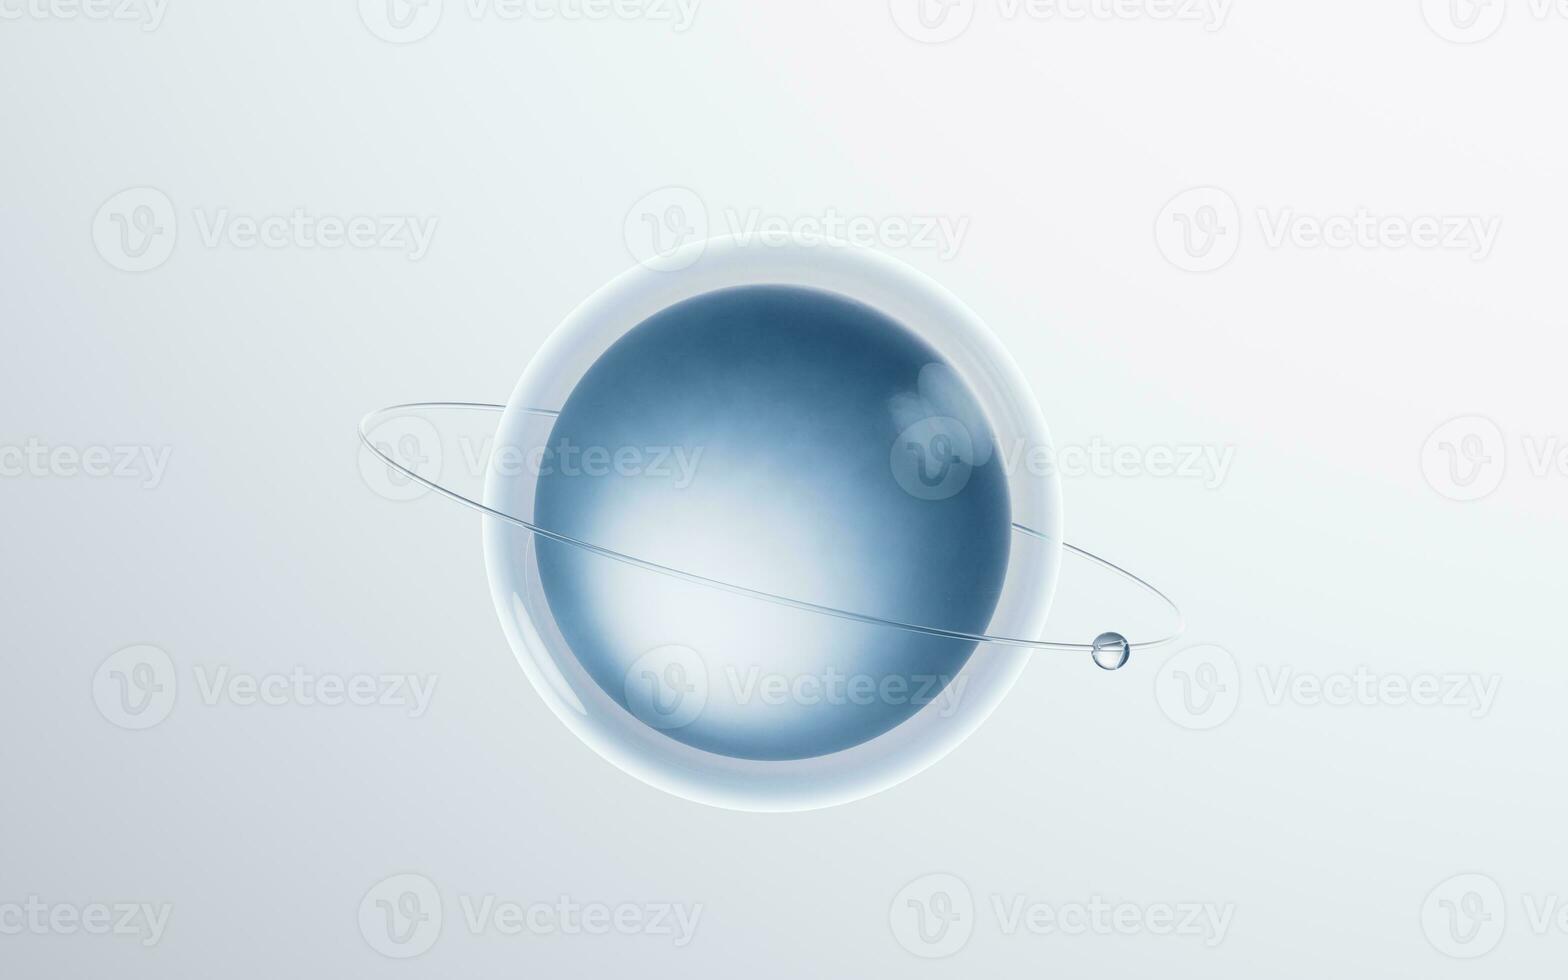 Transparent ball with rings surrounded, 3d rendering. photo